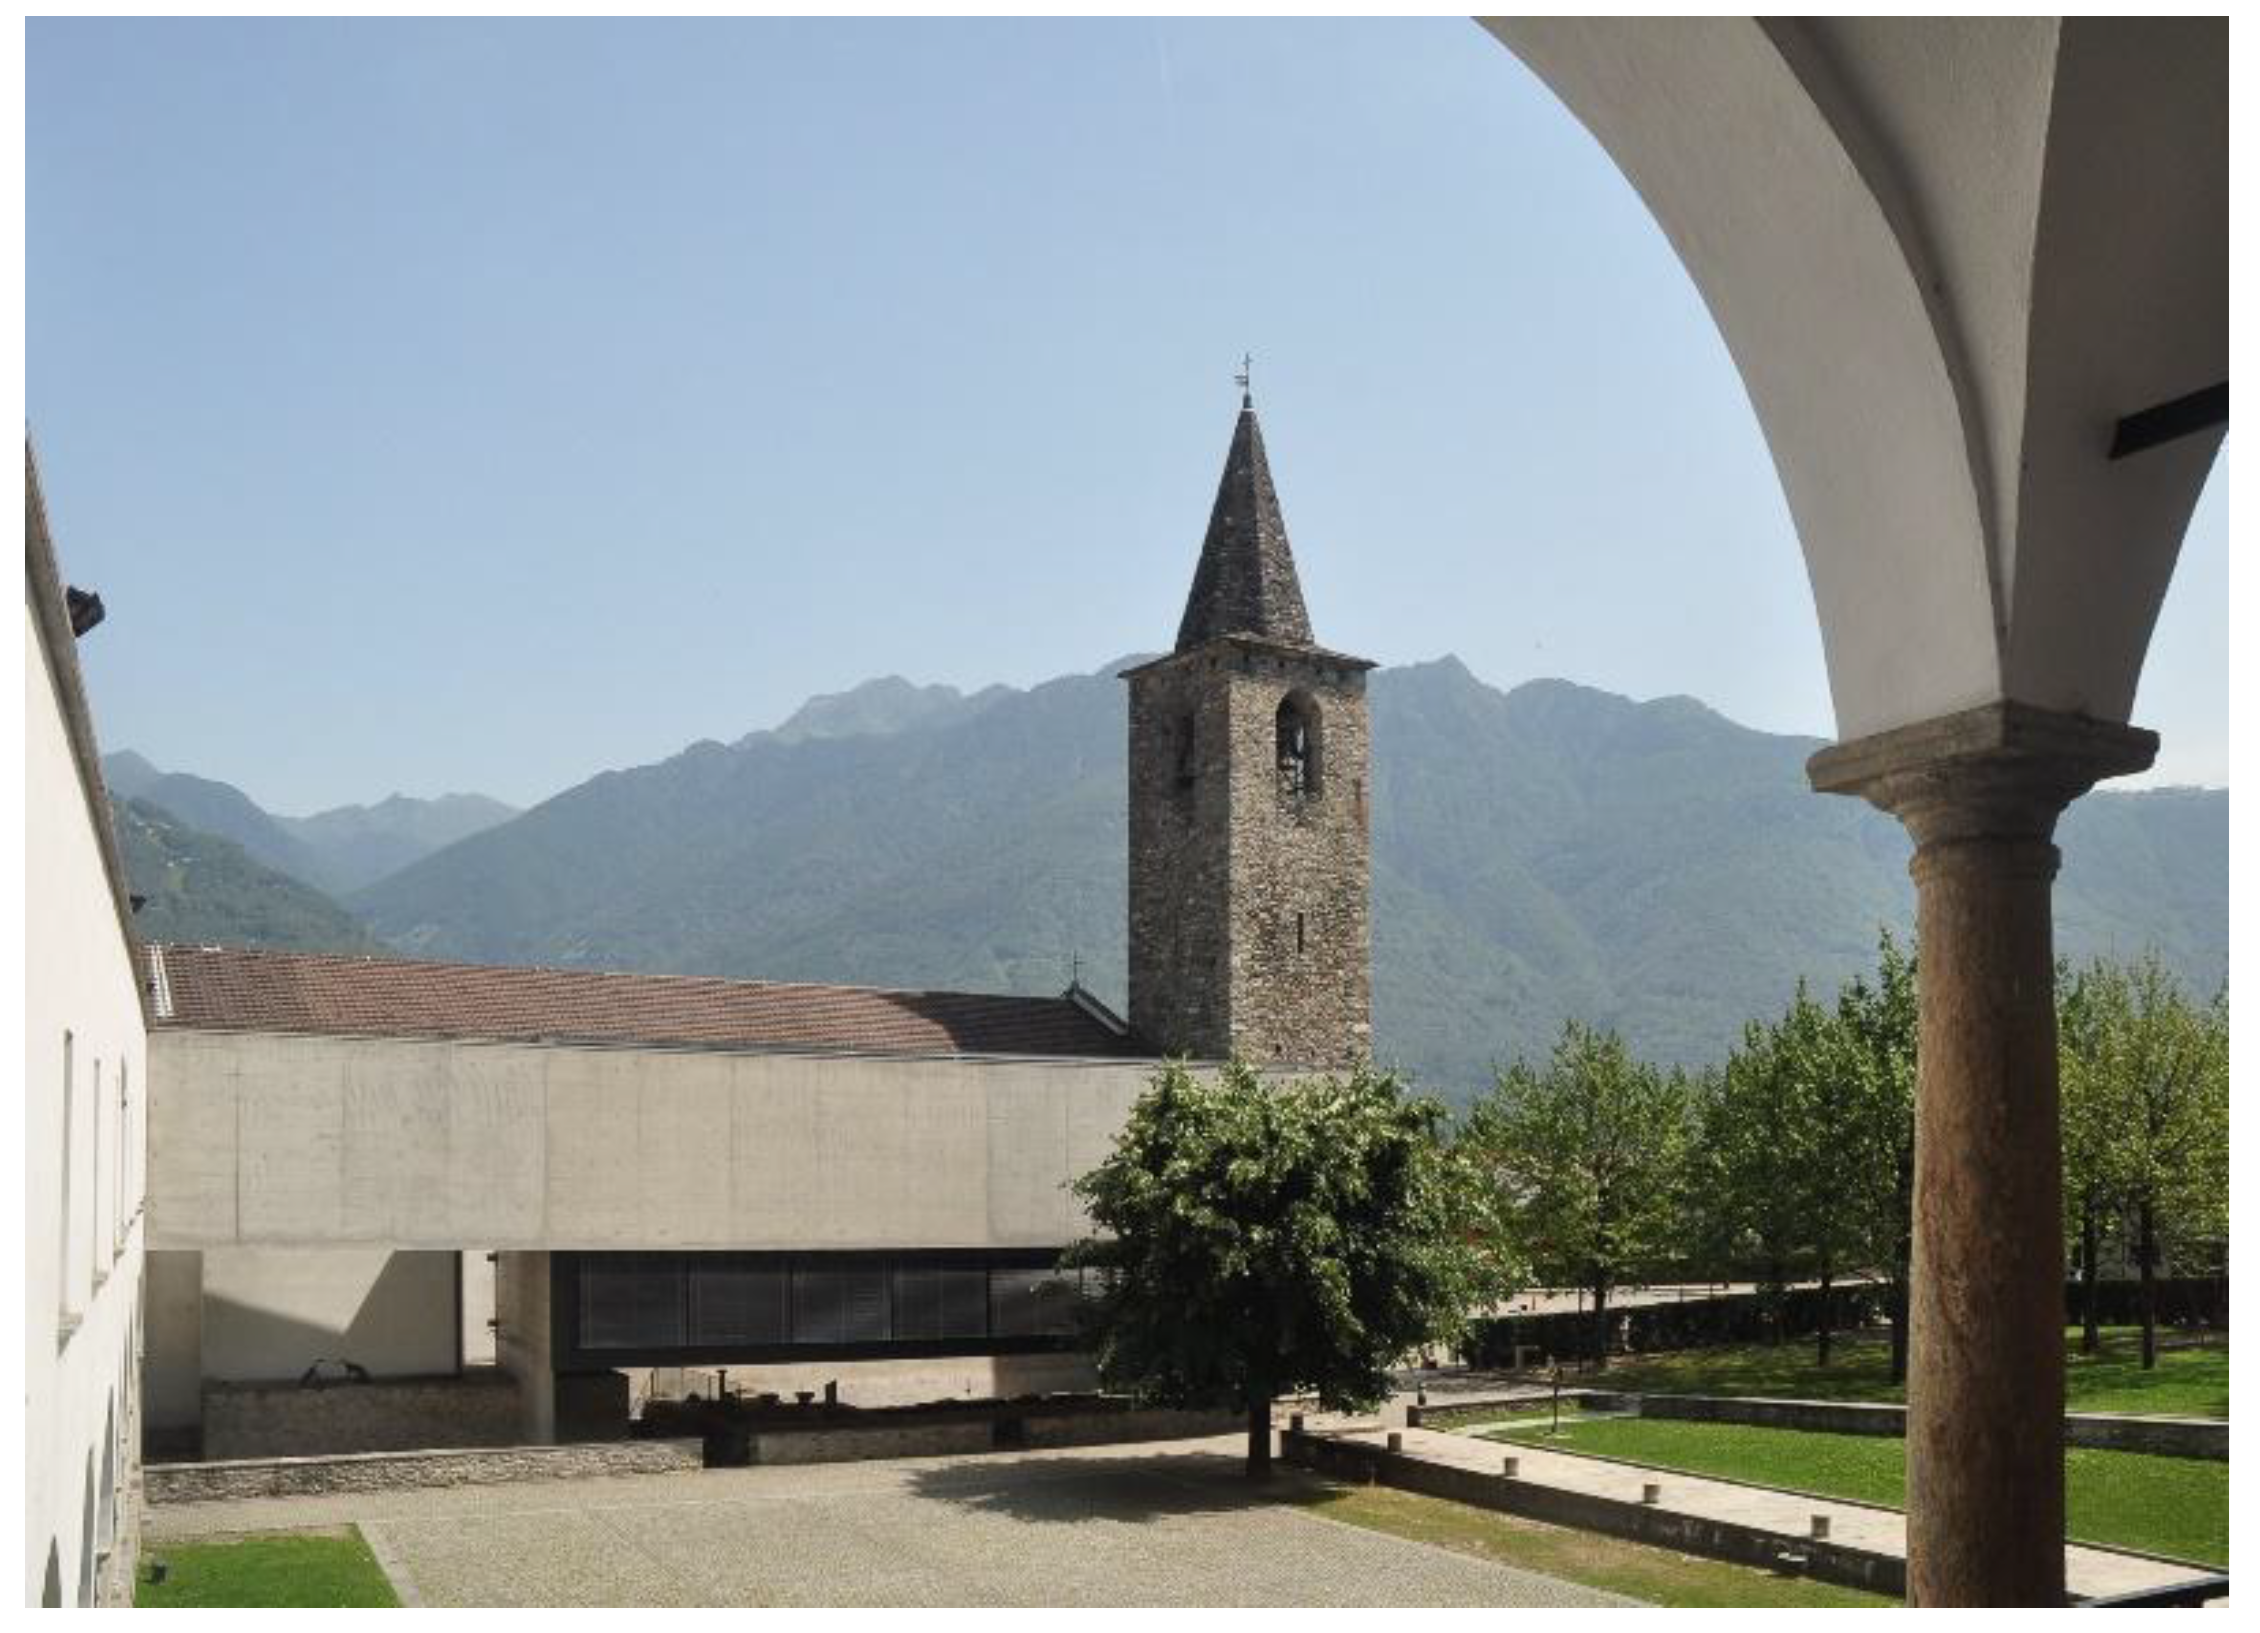 Land | Free Full-Text | Form-Based Regulations to Prevent the Loss of  Urbanity of Historic Small Towns: Replicability of the Monte Carasso Case |  HTML